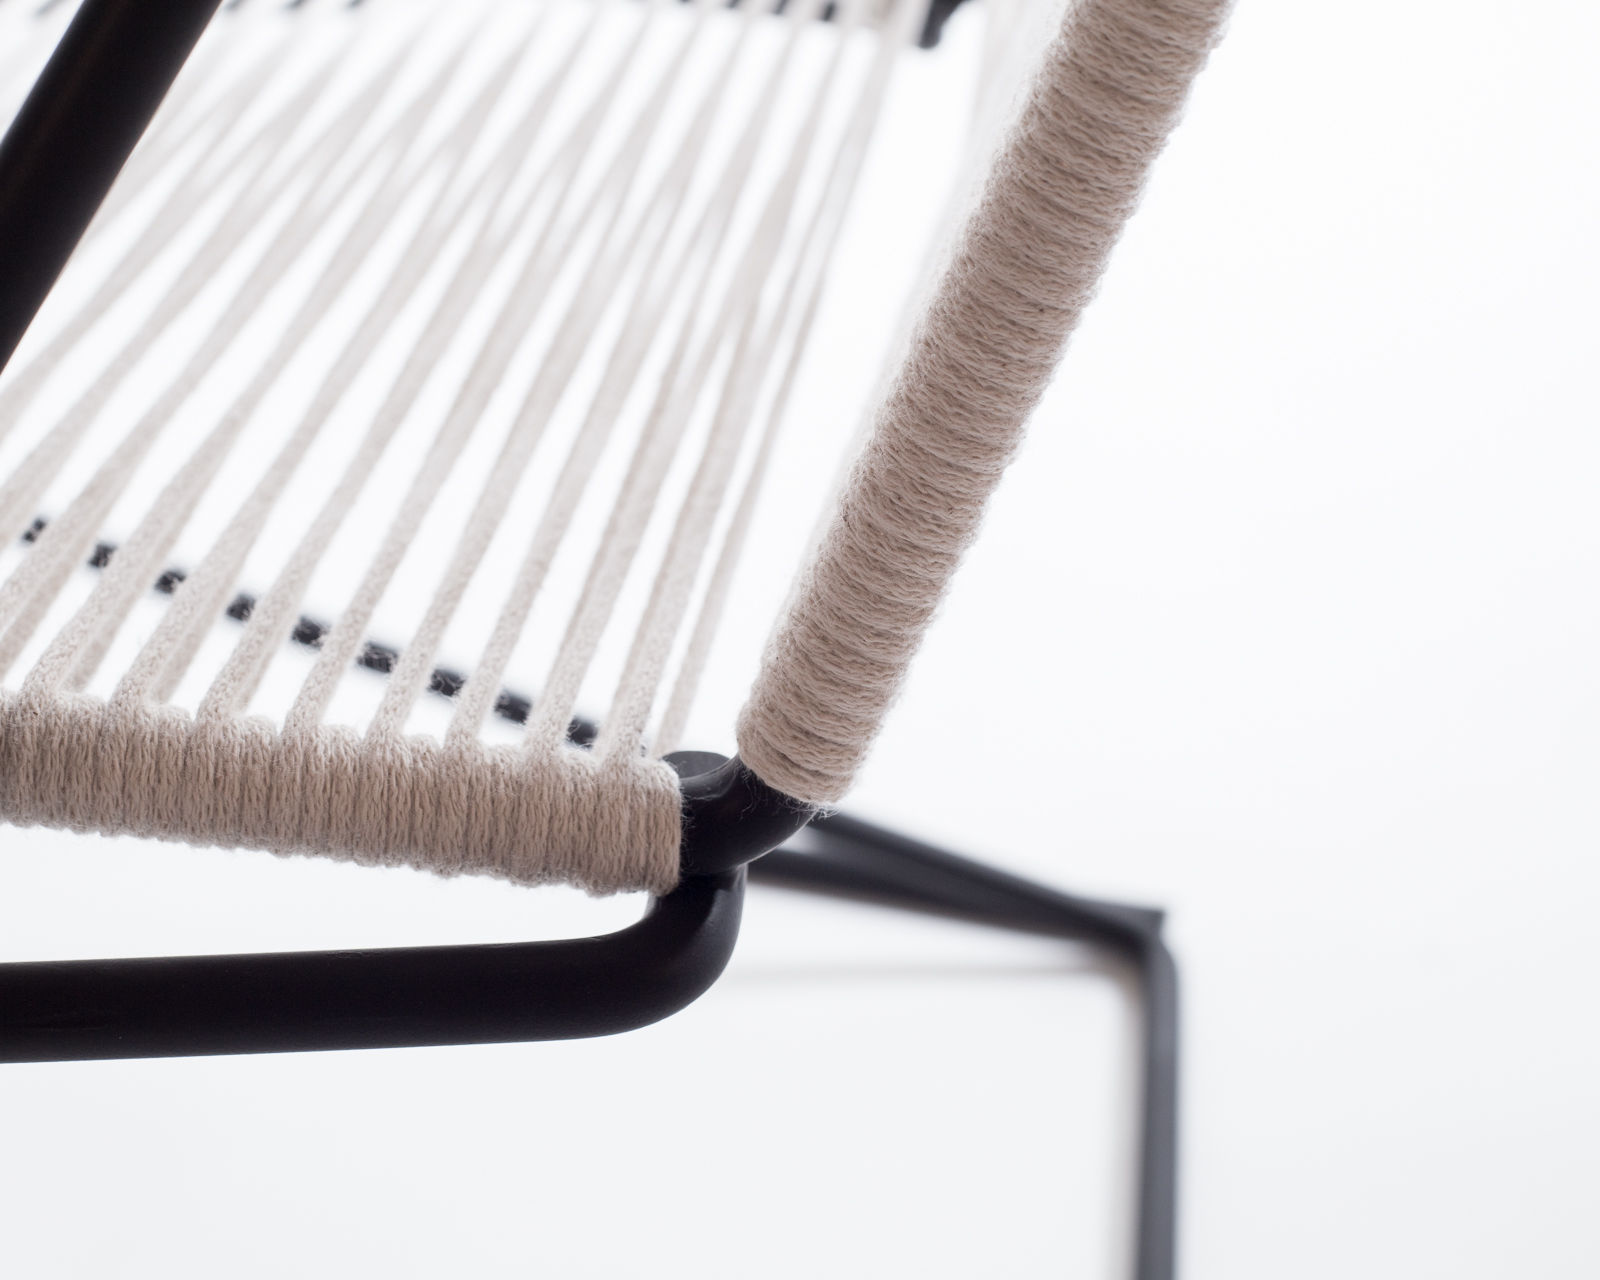 CR45 Chair by Many Hands Design